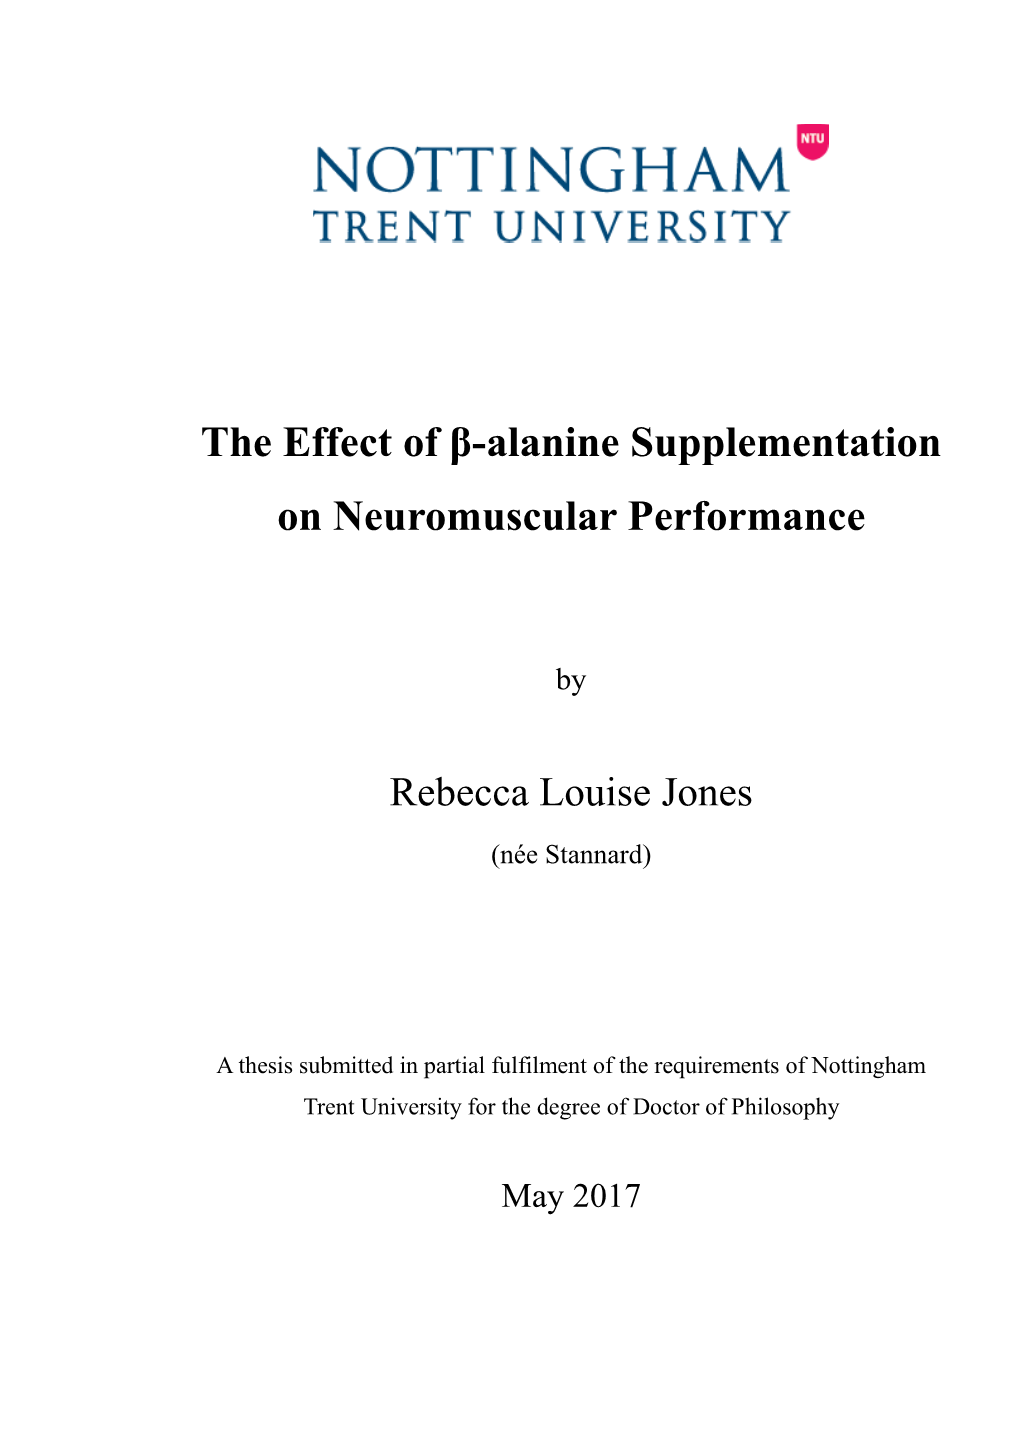 The Effect of Β-Alanine Supplementation on Neuromuscular Performance